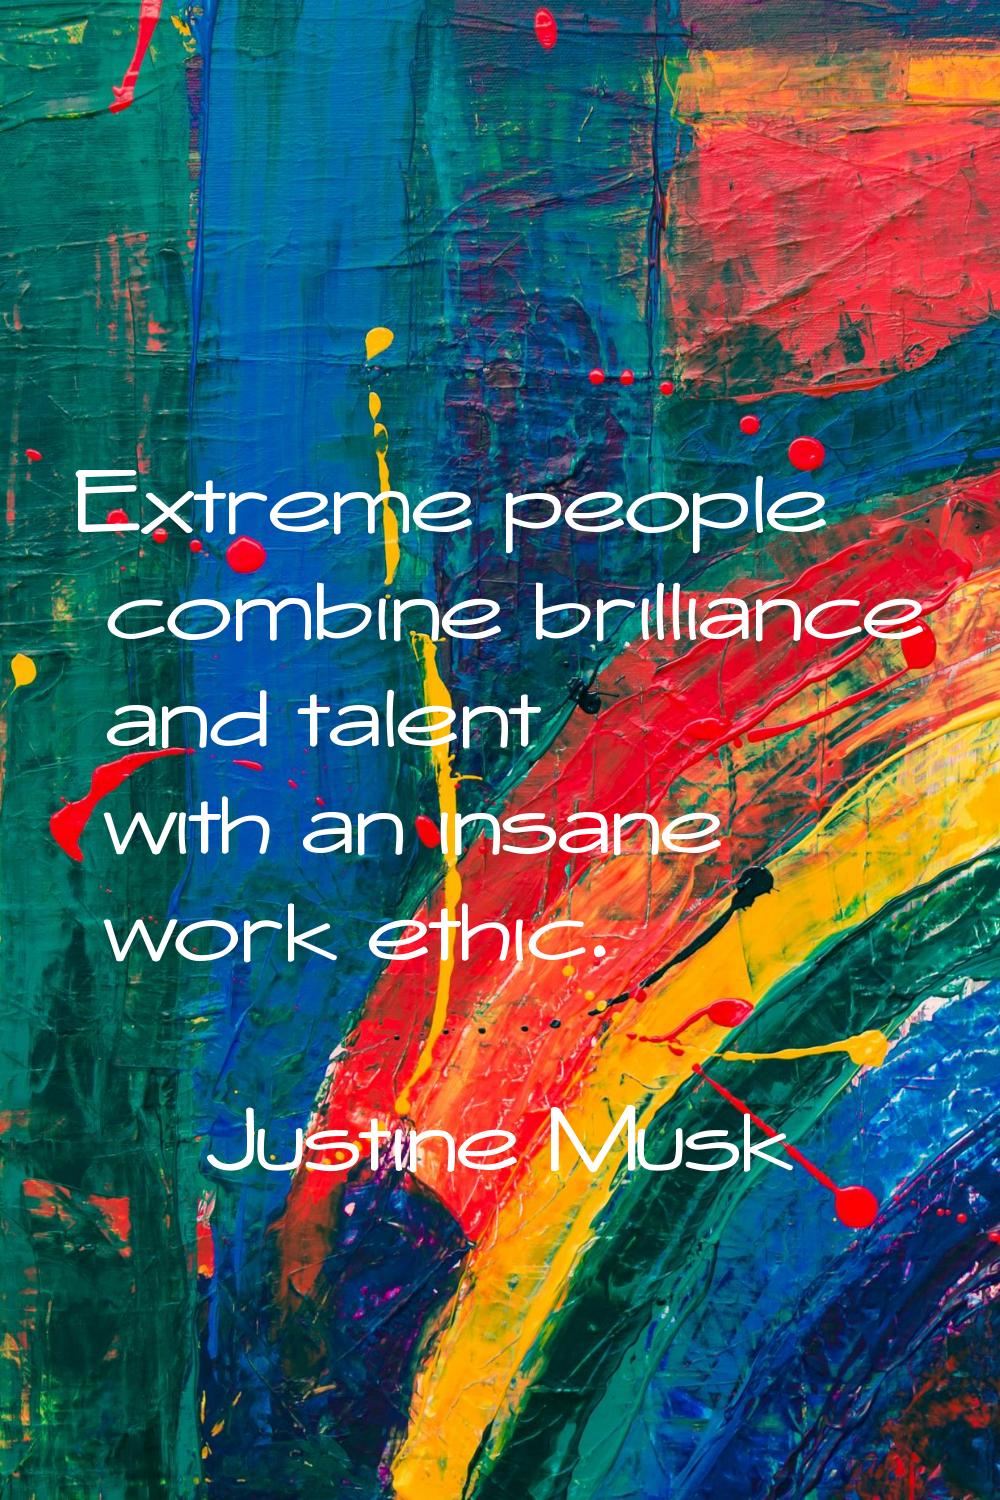 Extreme people combine brilliance and talent with an insane work ethic.